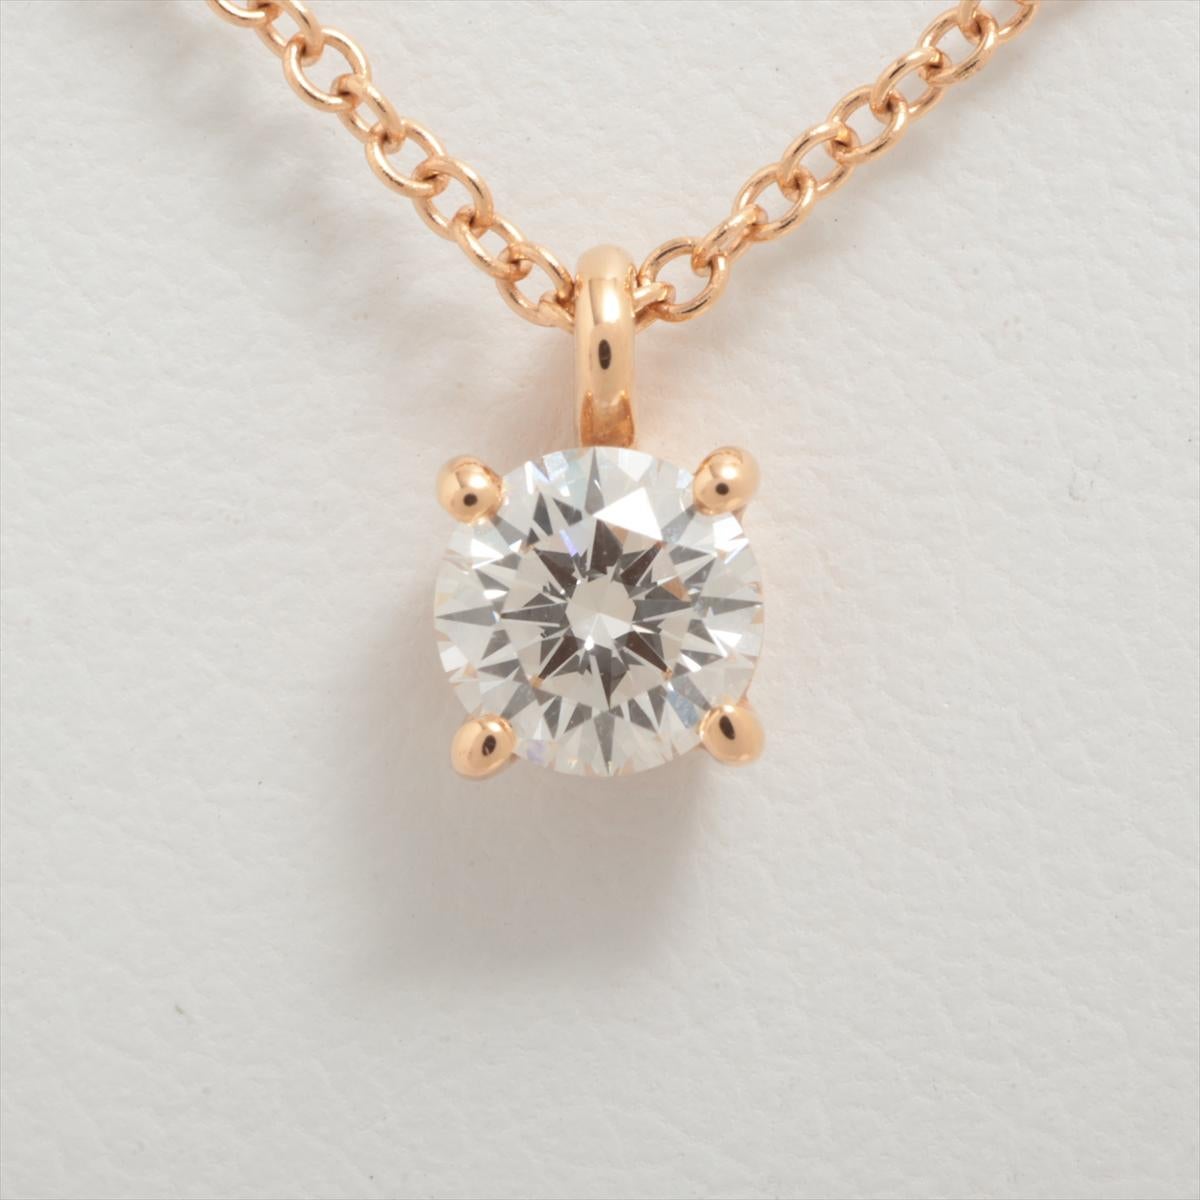 Brand : Tiffany&Co. 
Description: Tiffany Solitaire Diamond Necklace 
Metal Type: 750PG/Yellow Gold
Total Weight:  1.8g
Condition: Preowned; small signs of wearing
Box -    Included
Papers -  Included
